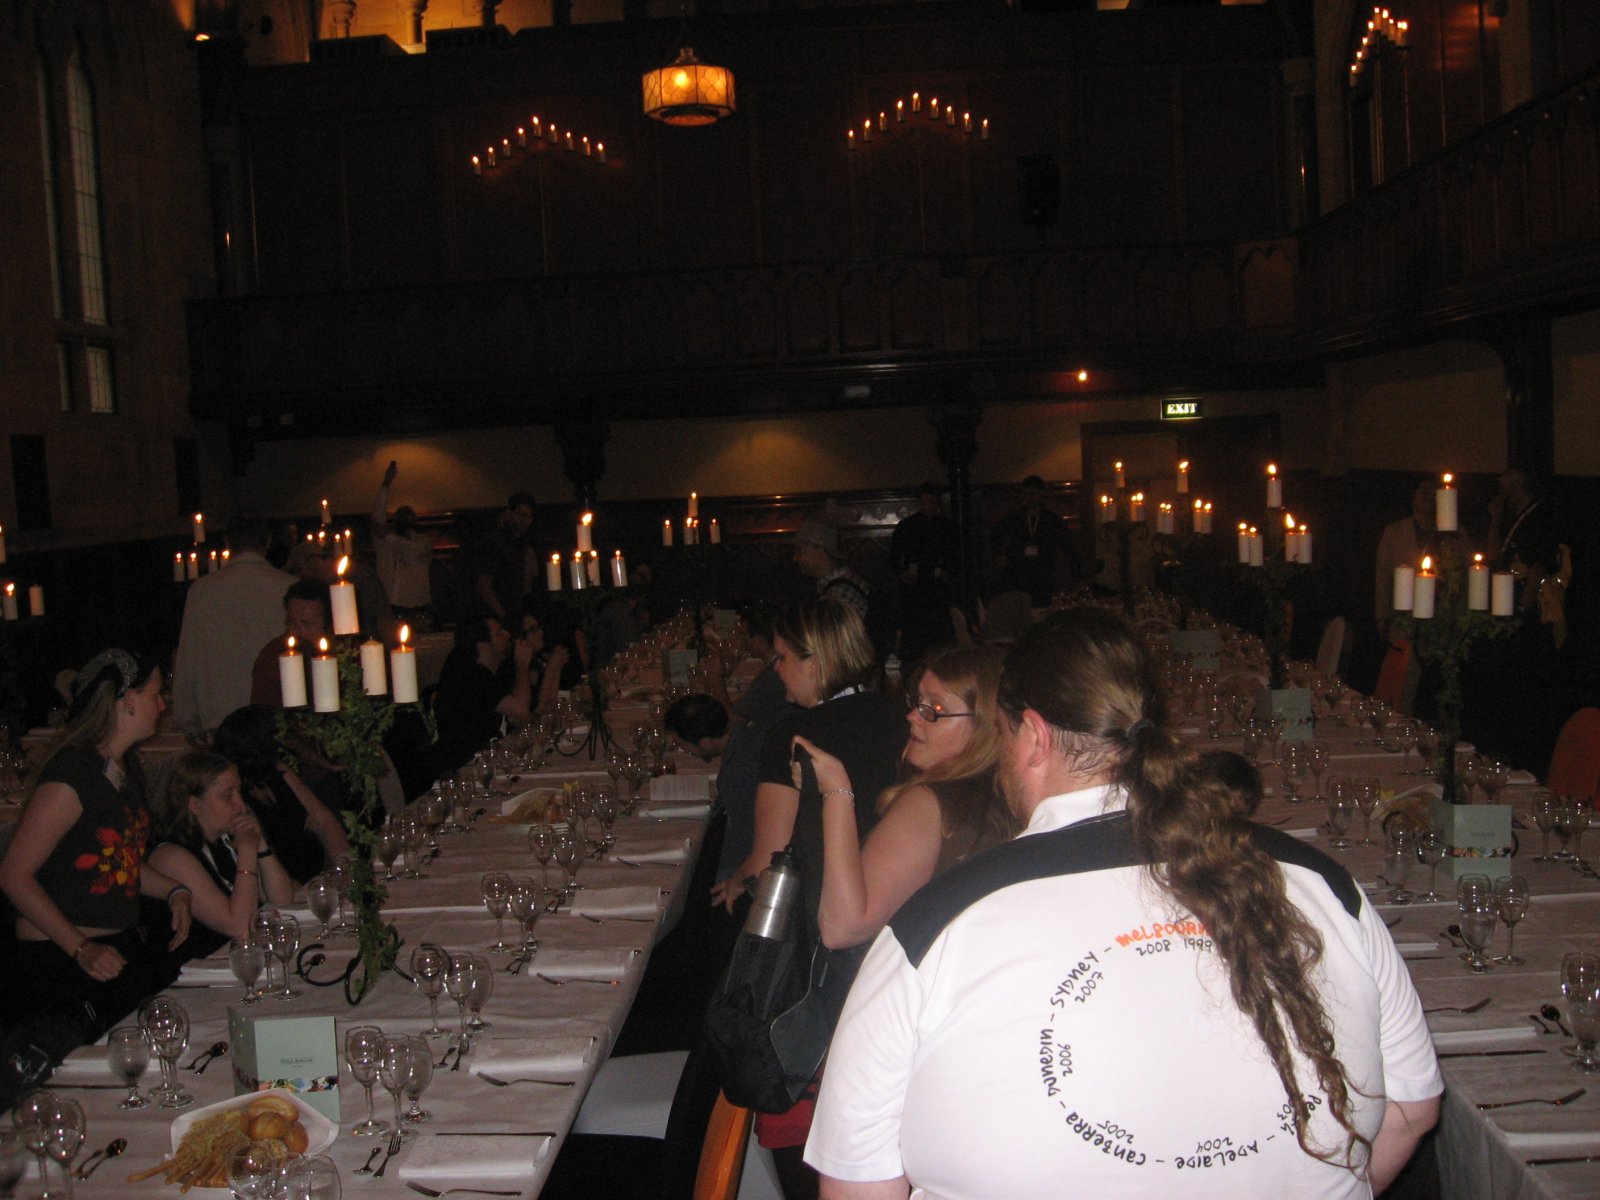 several people sitting at tables in a banquet hall